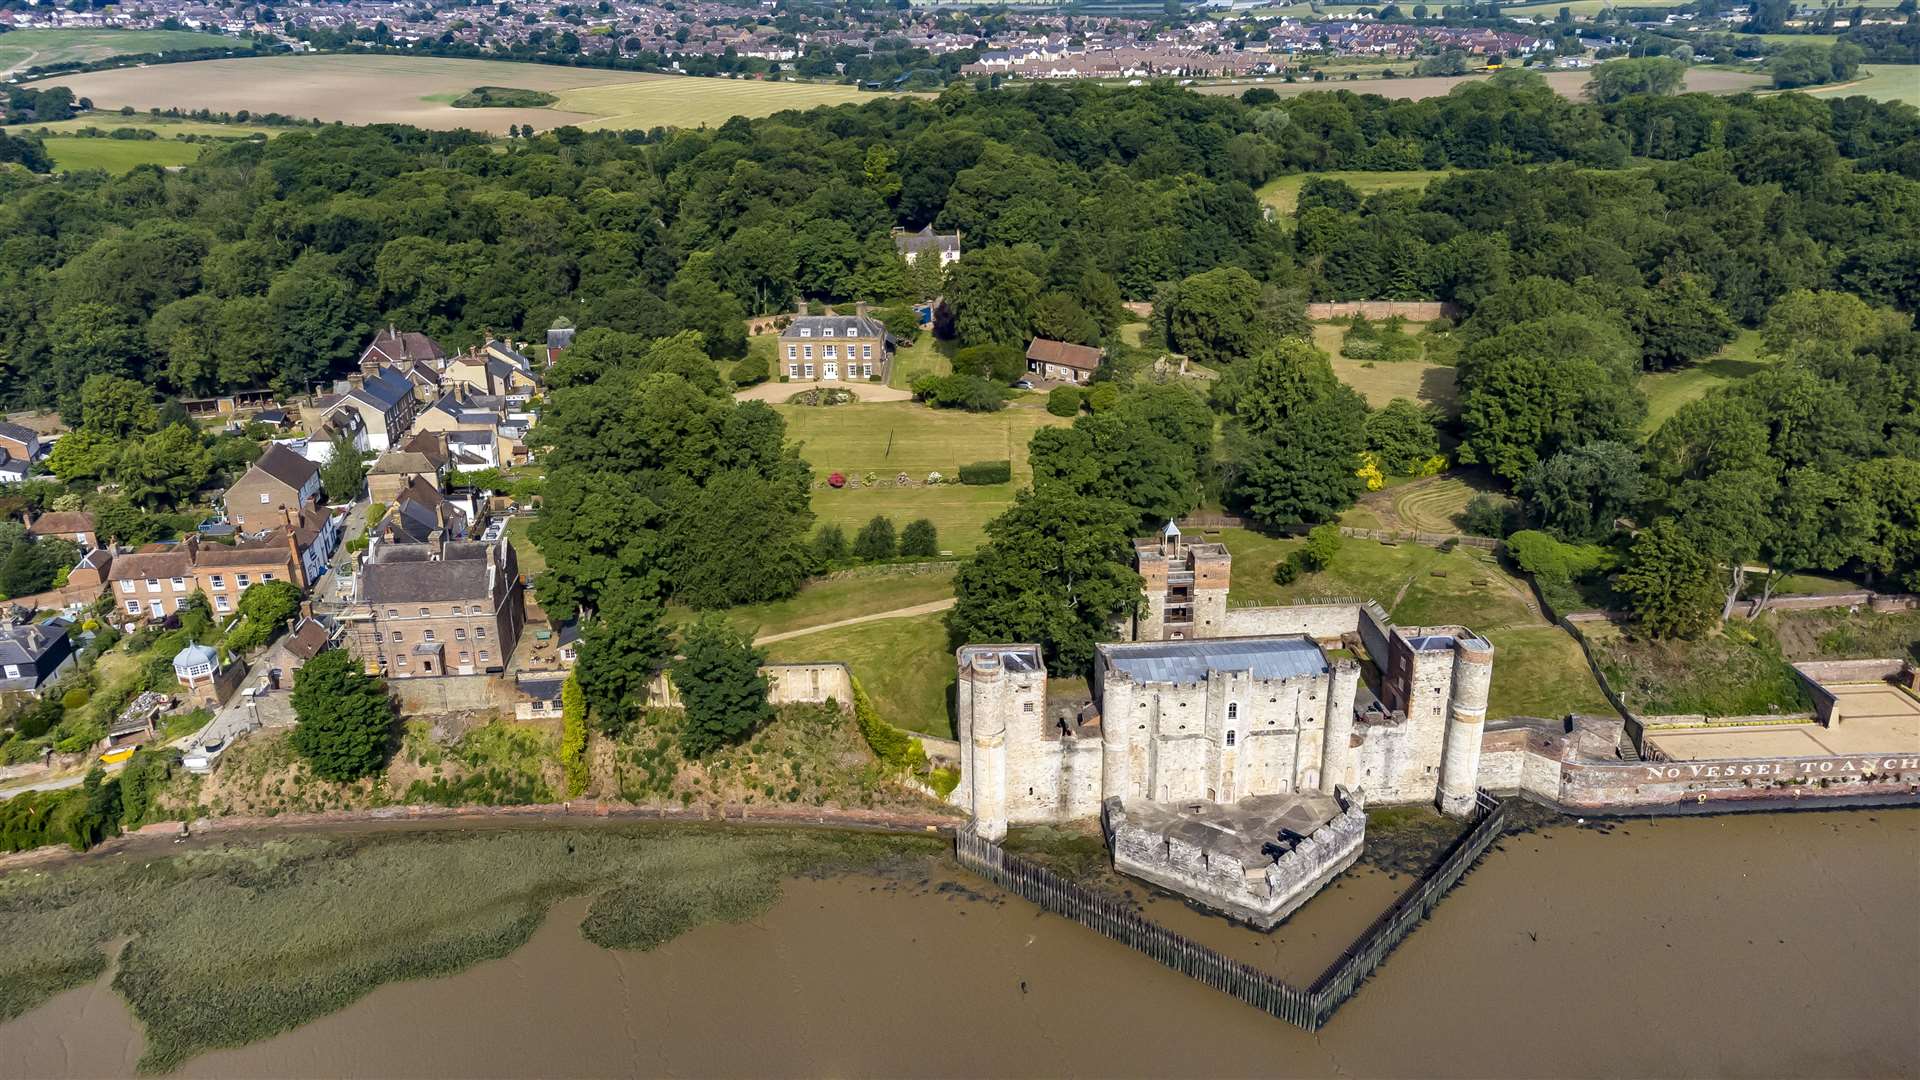 Upnor House Castle in the shadow of Upnor Castle. Credit Nichecom